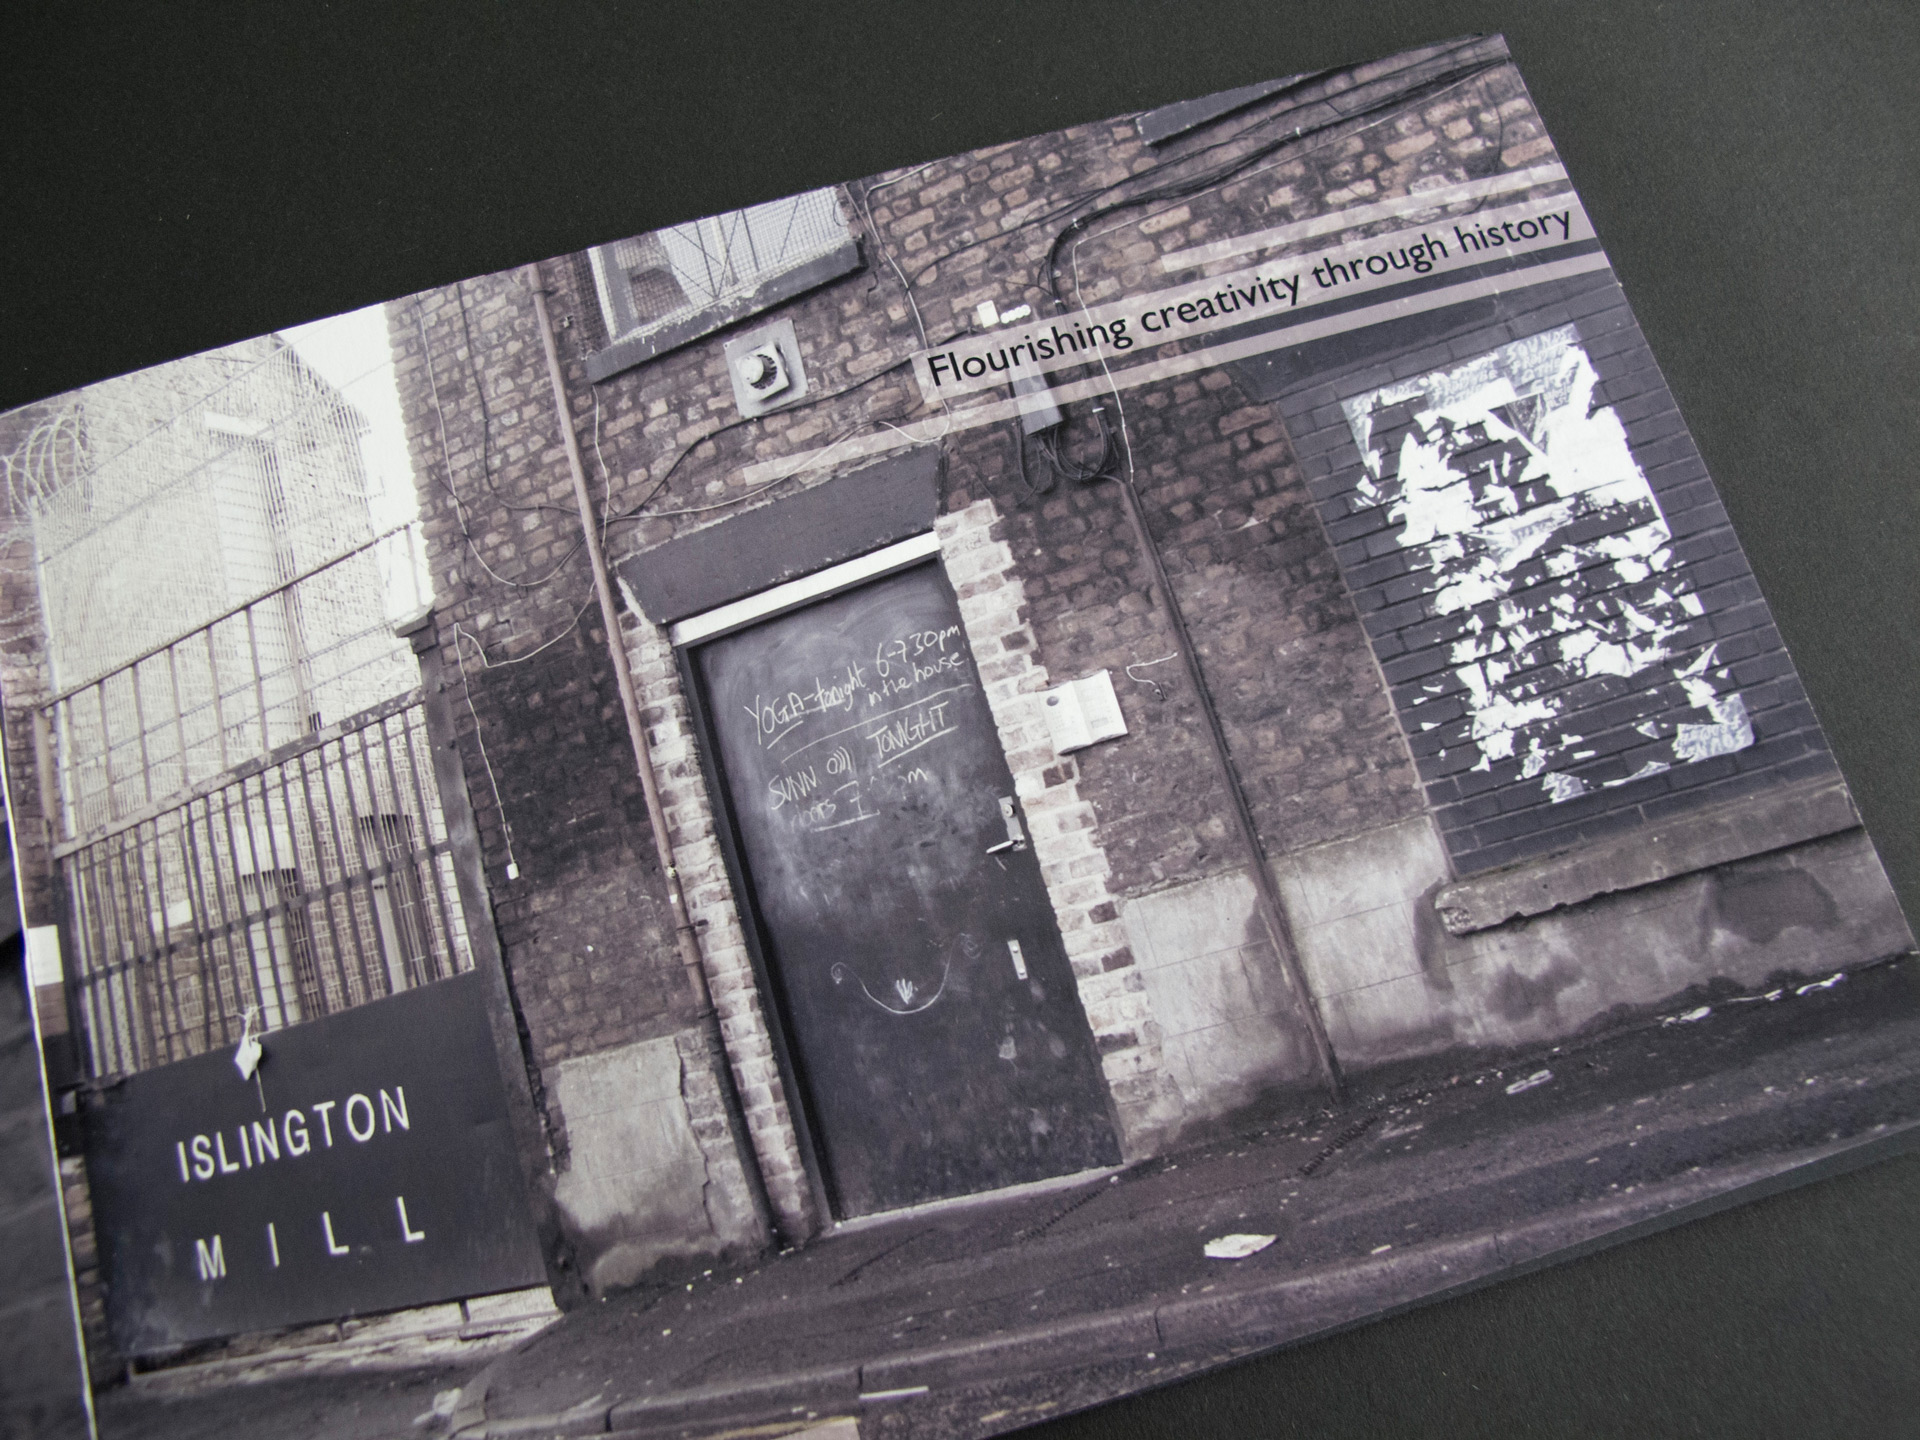 This booklet page features a desaturated photograph of a mill in Salford. The building in the photo has a bricked-up window and there is a gate to the left of it with a sign that reads 'Islington Mill'. Overlaid on the photograph are the words 'Flourishing creativity through history'.